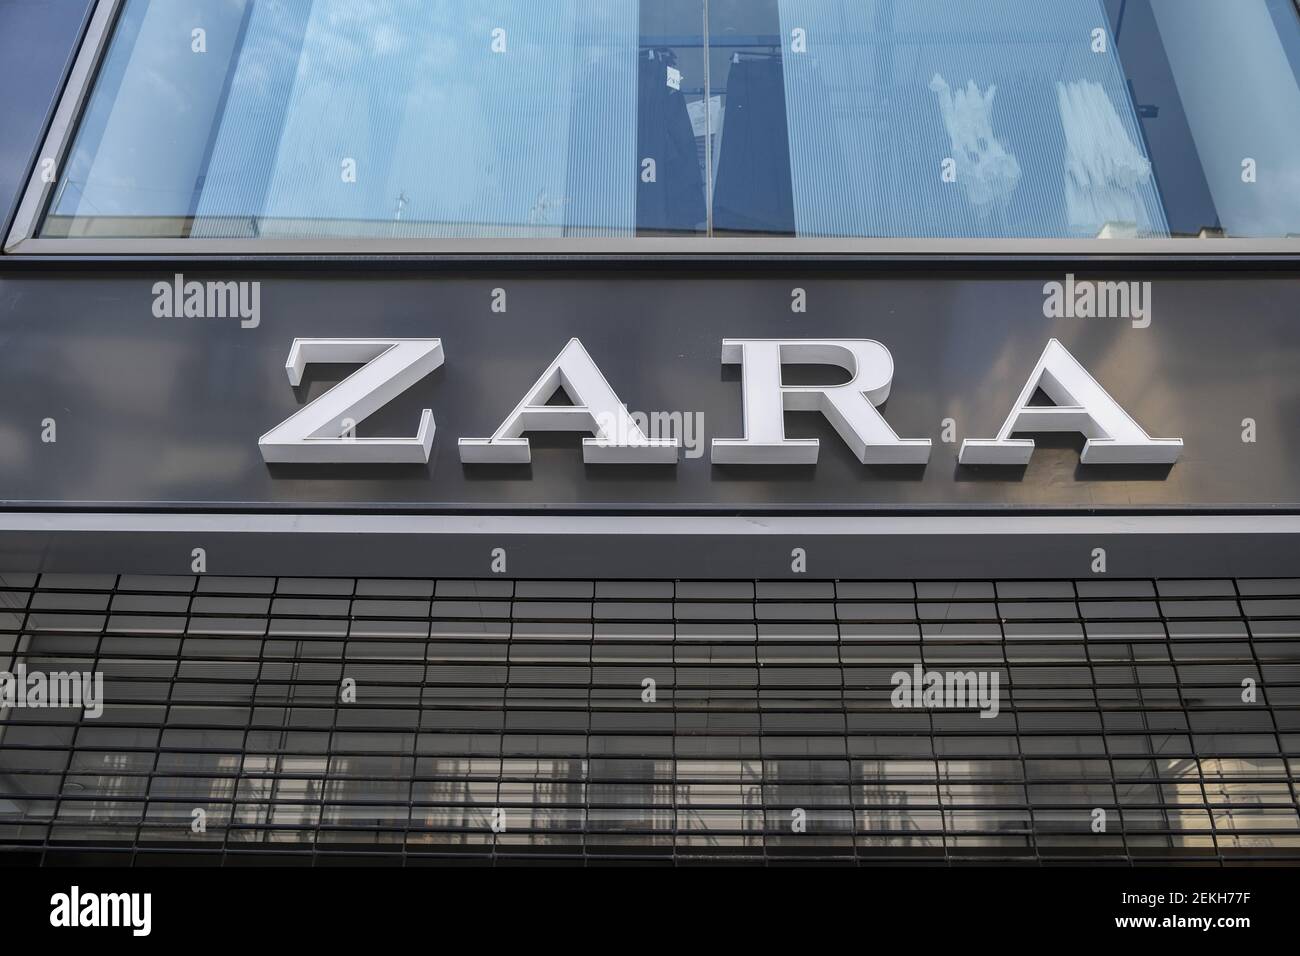 The Zara logo, one of the Inditex group brands seen at the commercial hub  of Portal del l'Àngel de Barcelona. After presenting economic losses for  the first time the textile giant Inditex